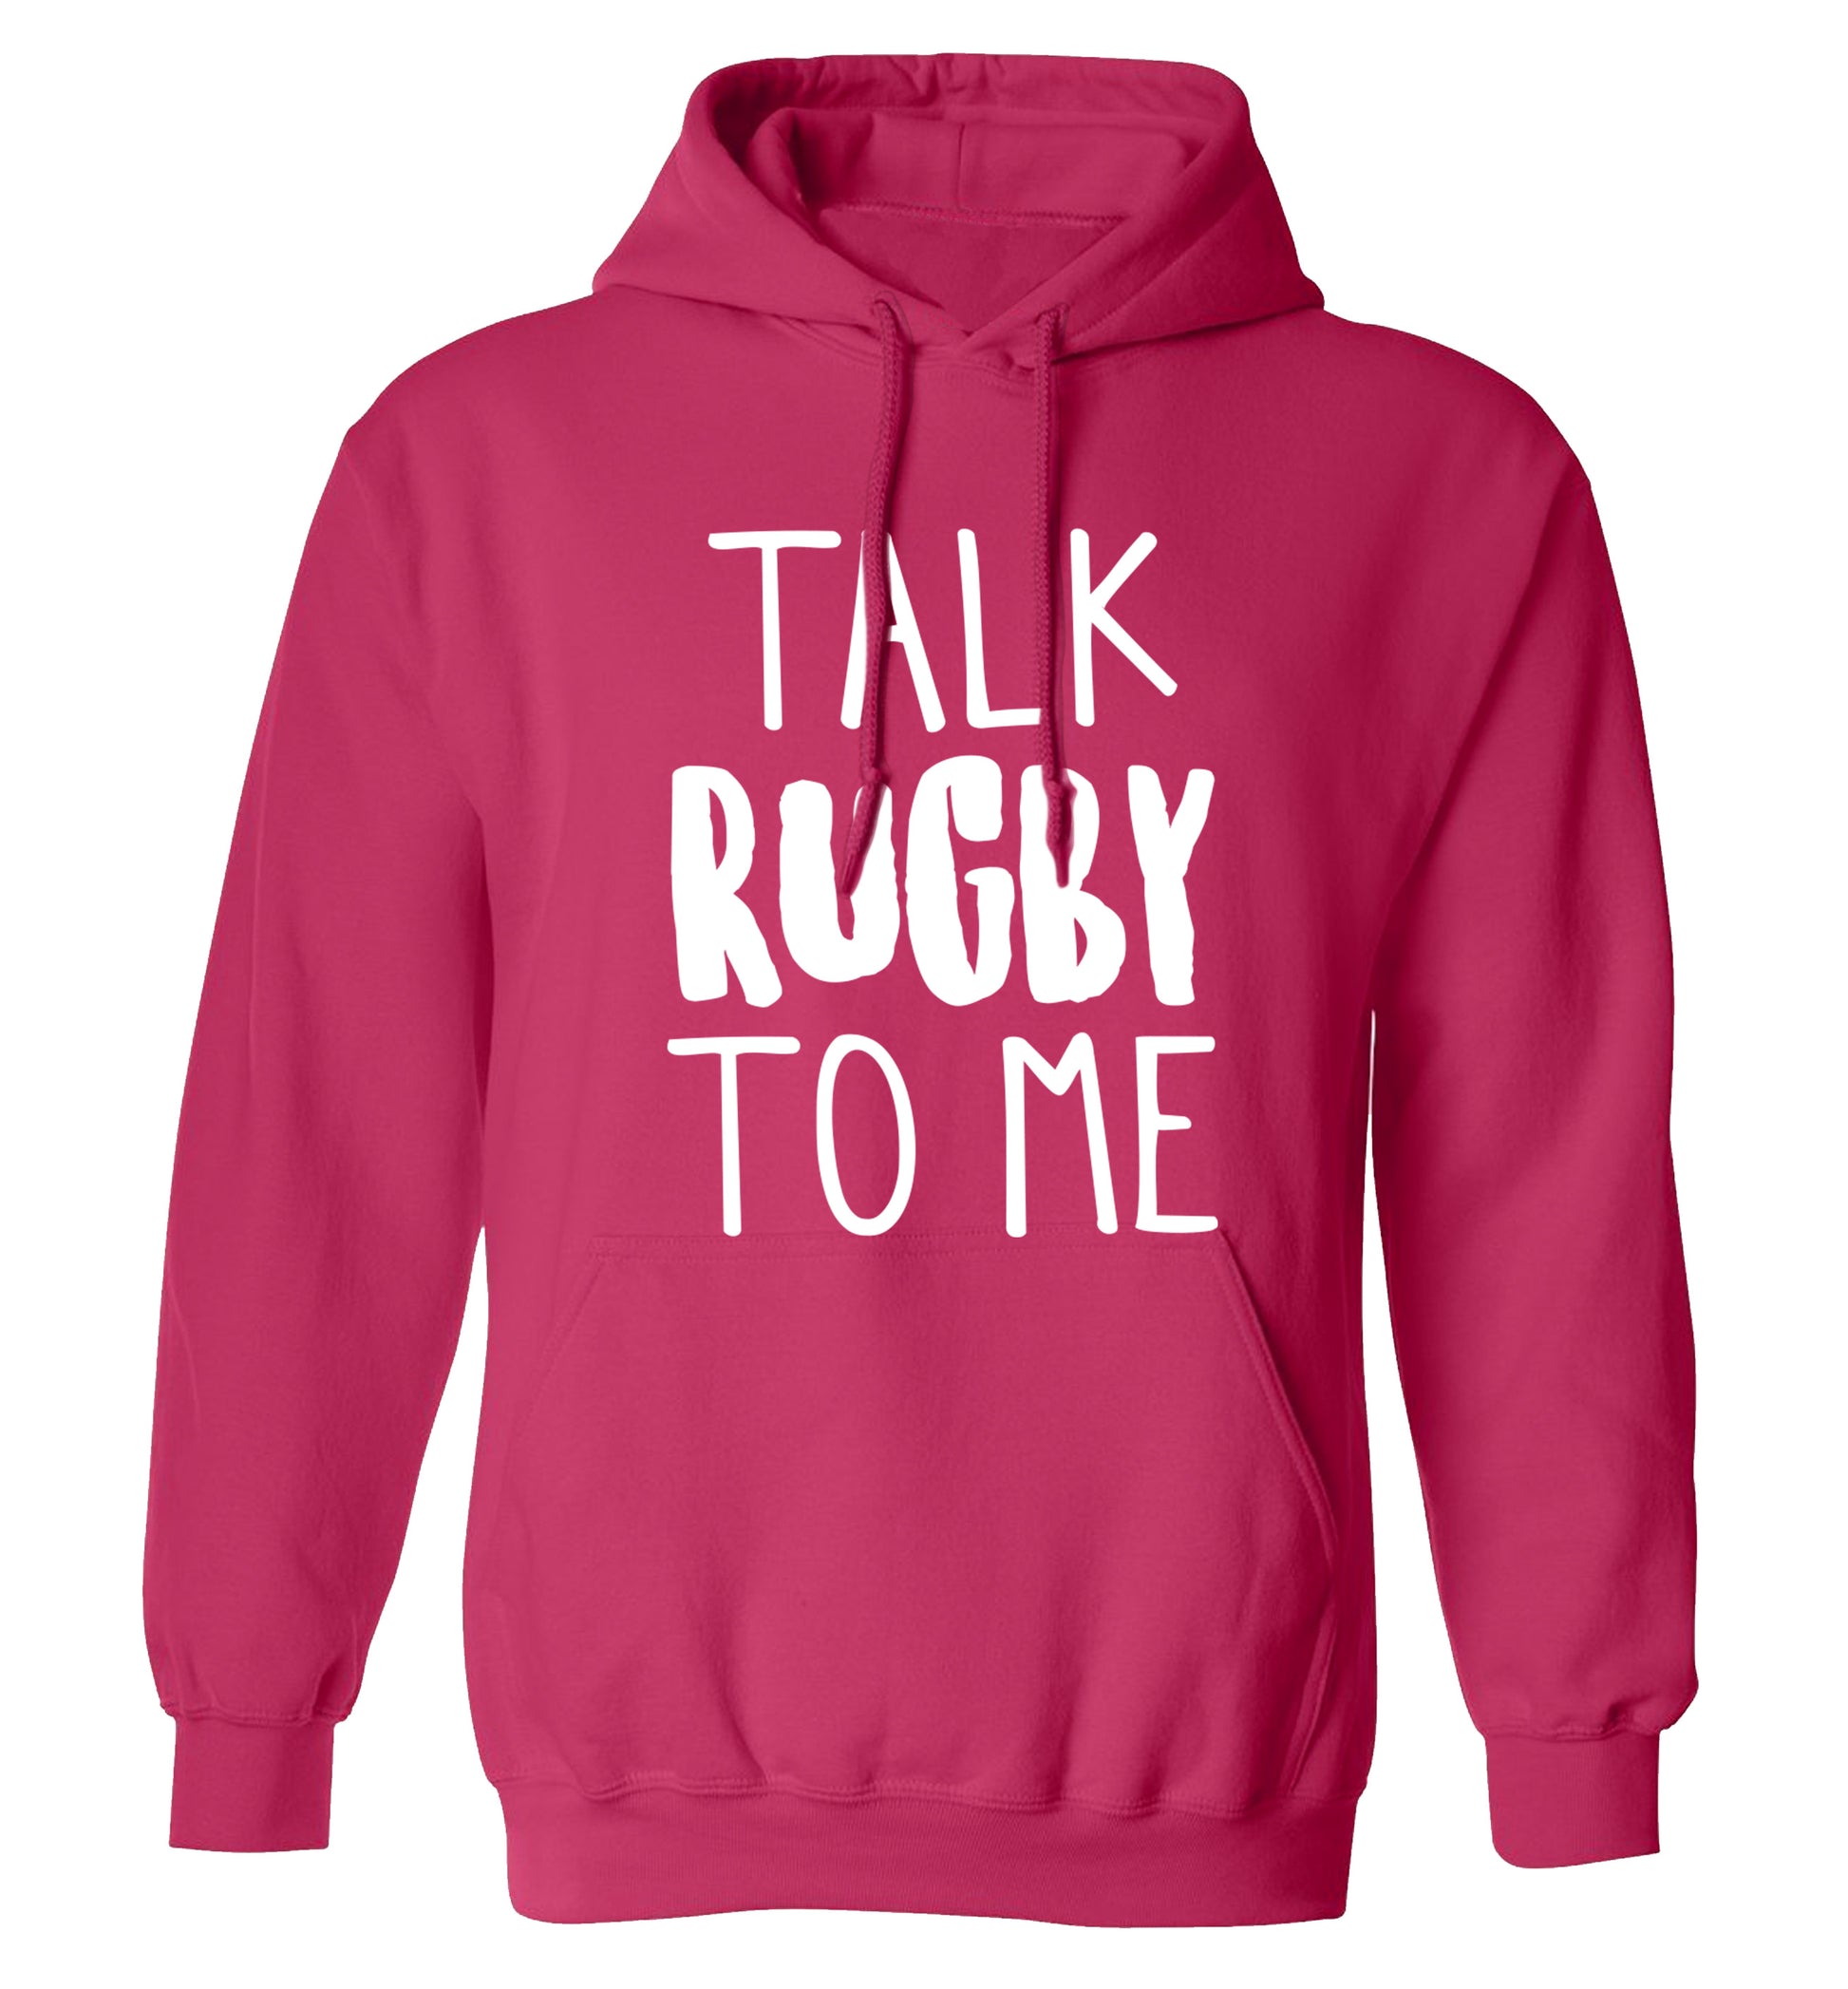 Talk rugby to me adults unisex pink hoodie 2XL